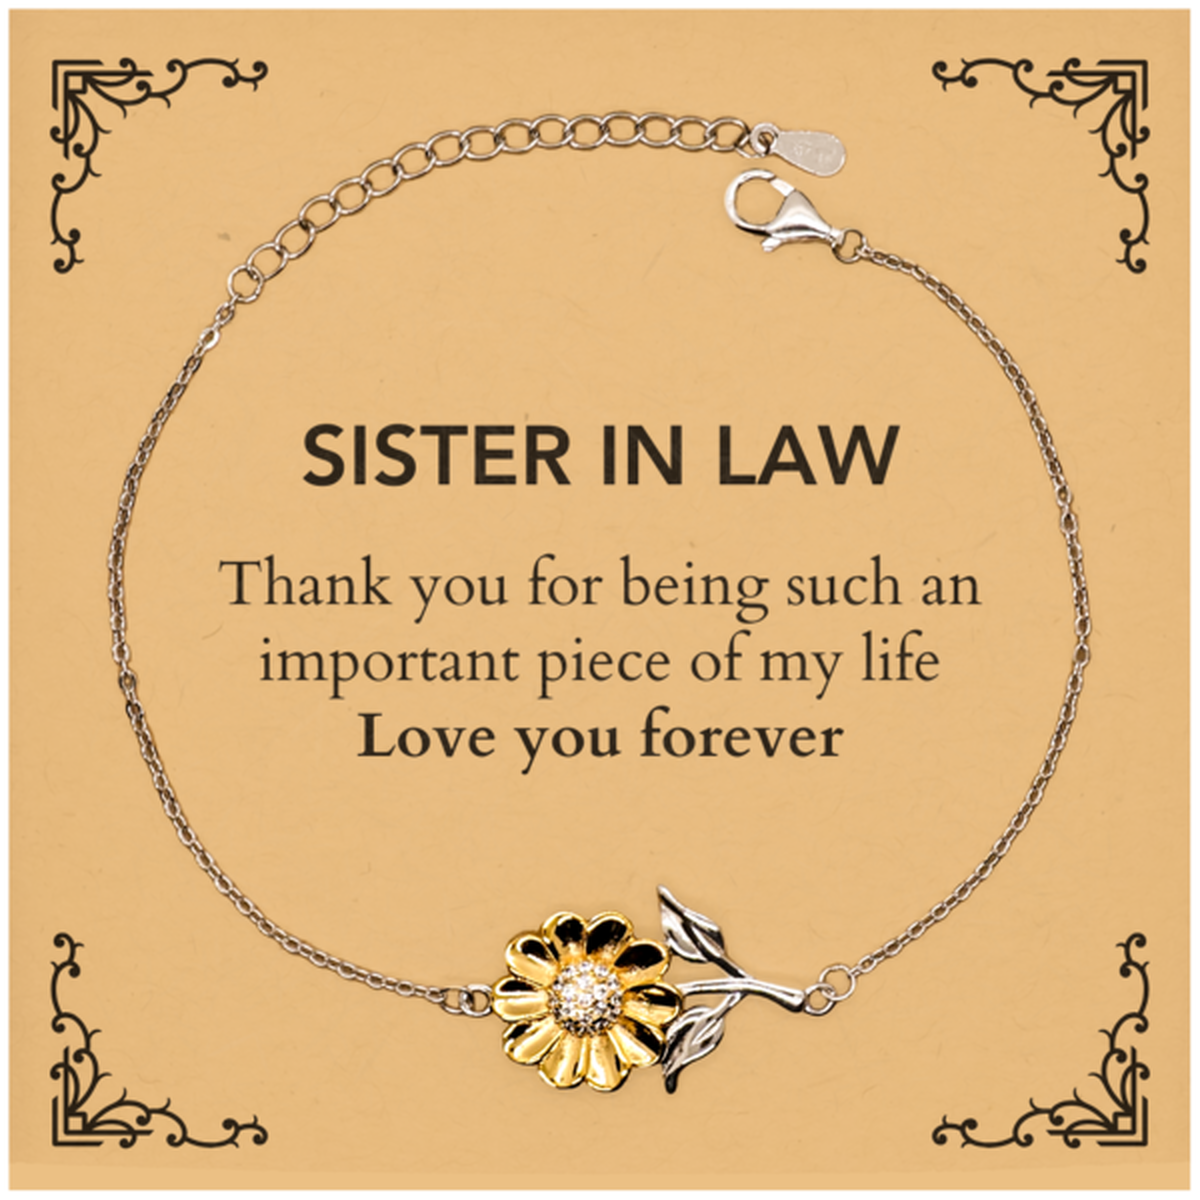 Appropriate Sister In Law Sunflower Bracelet Epic Birthday Gifts for Sister In Law Thank you for being such an important piece of my life Sister In Law Christmas Mothers Fathers Day